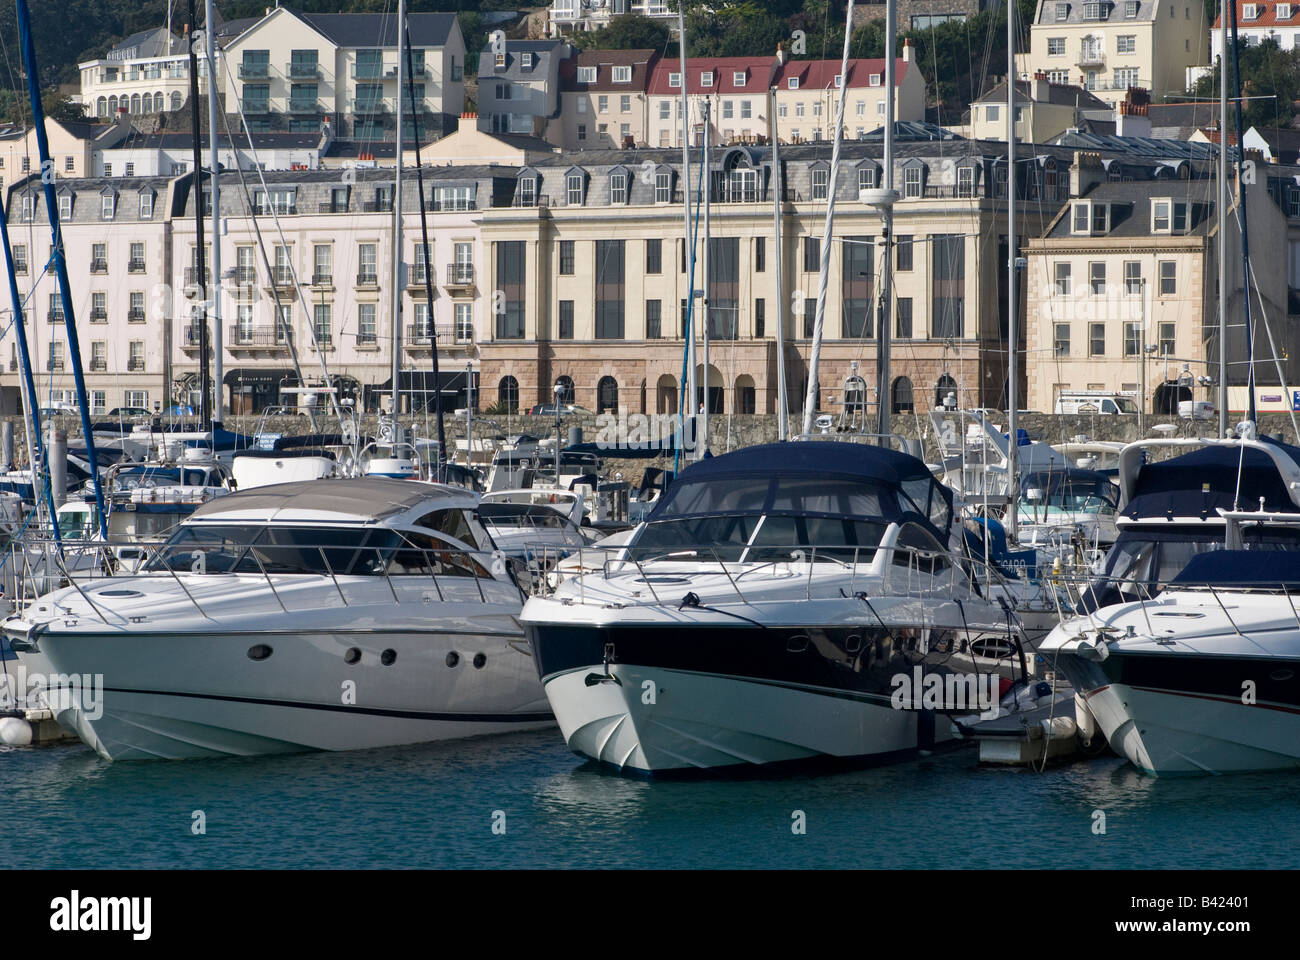 Financial centre and motor boats in marina, St Peter Port, Guernsey. Stock Photo